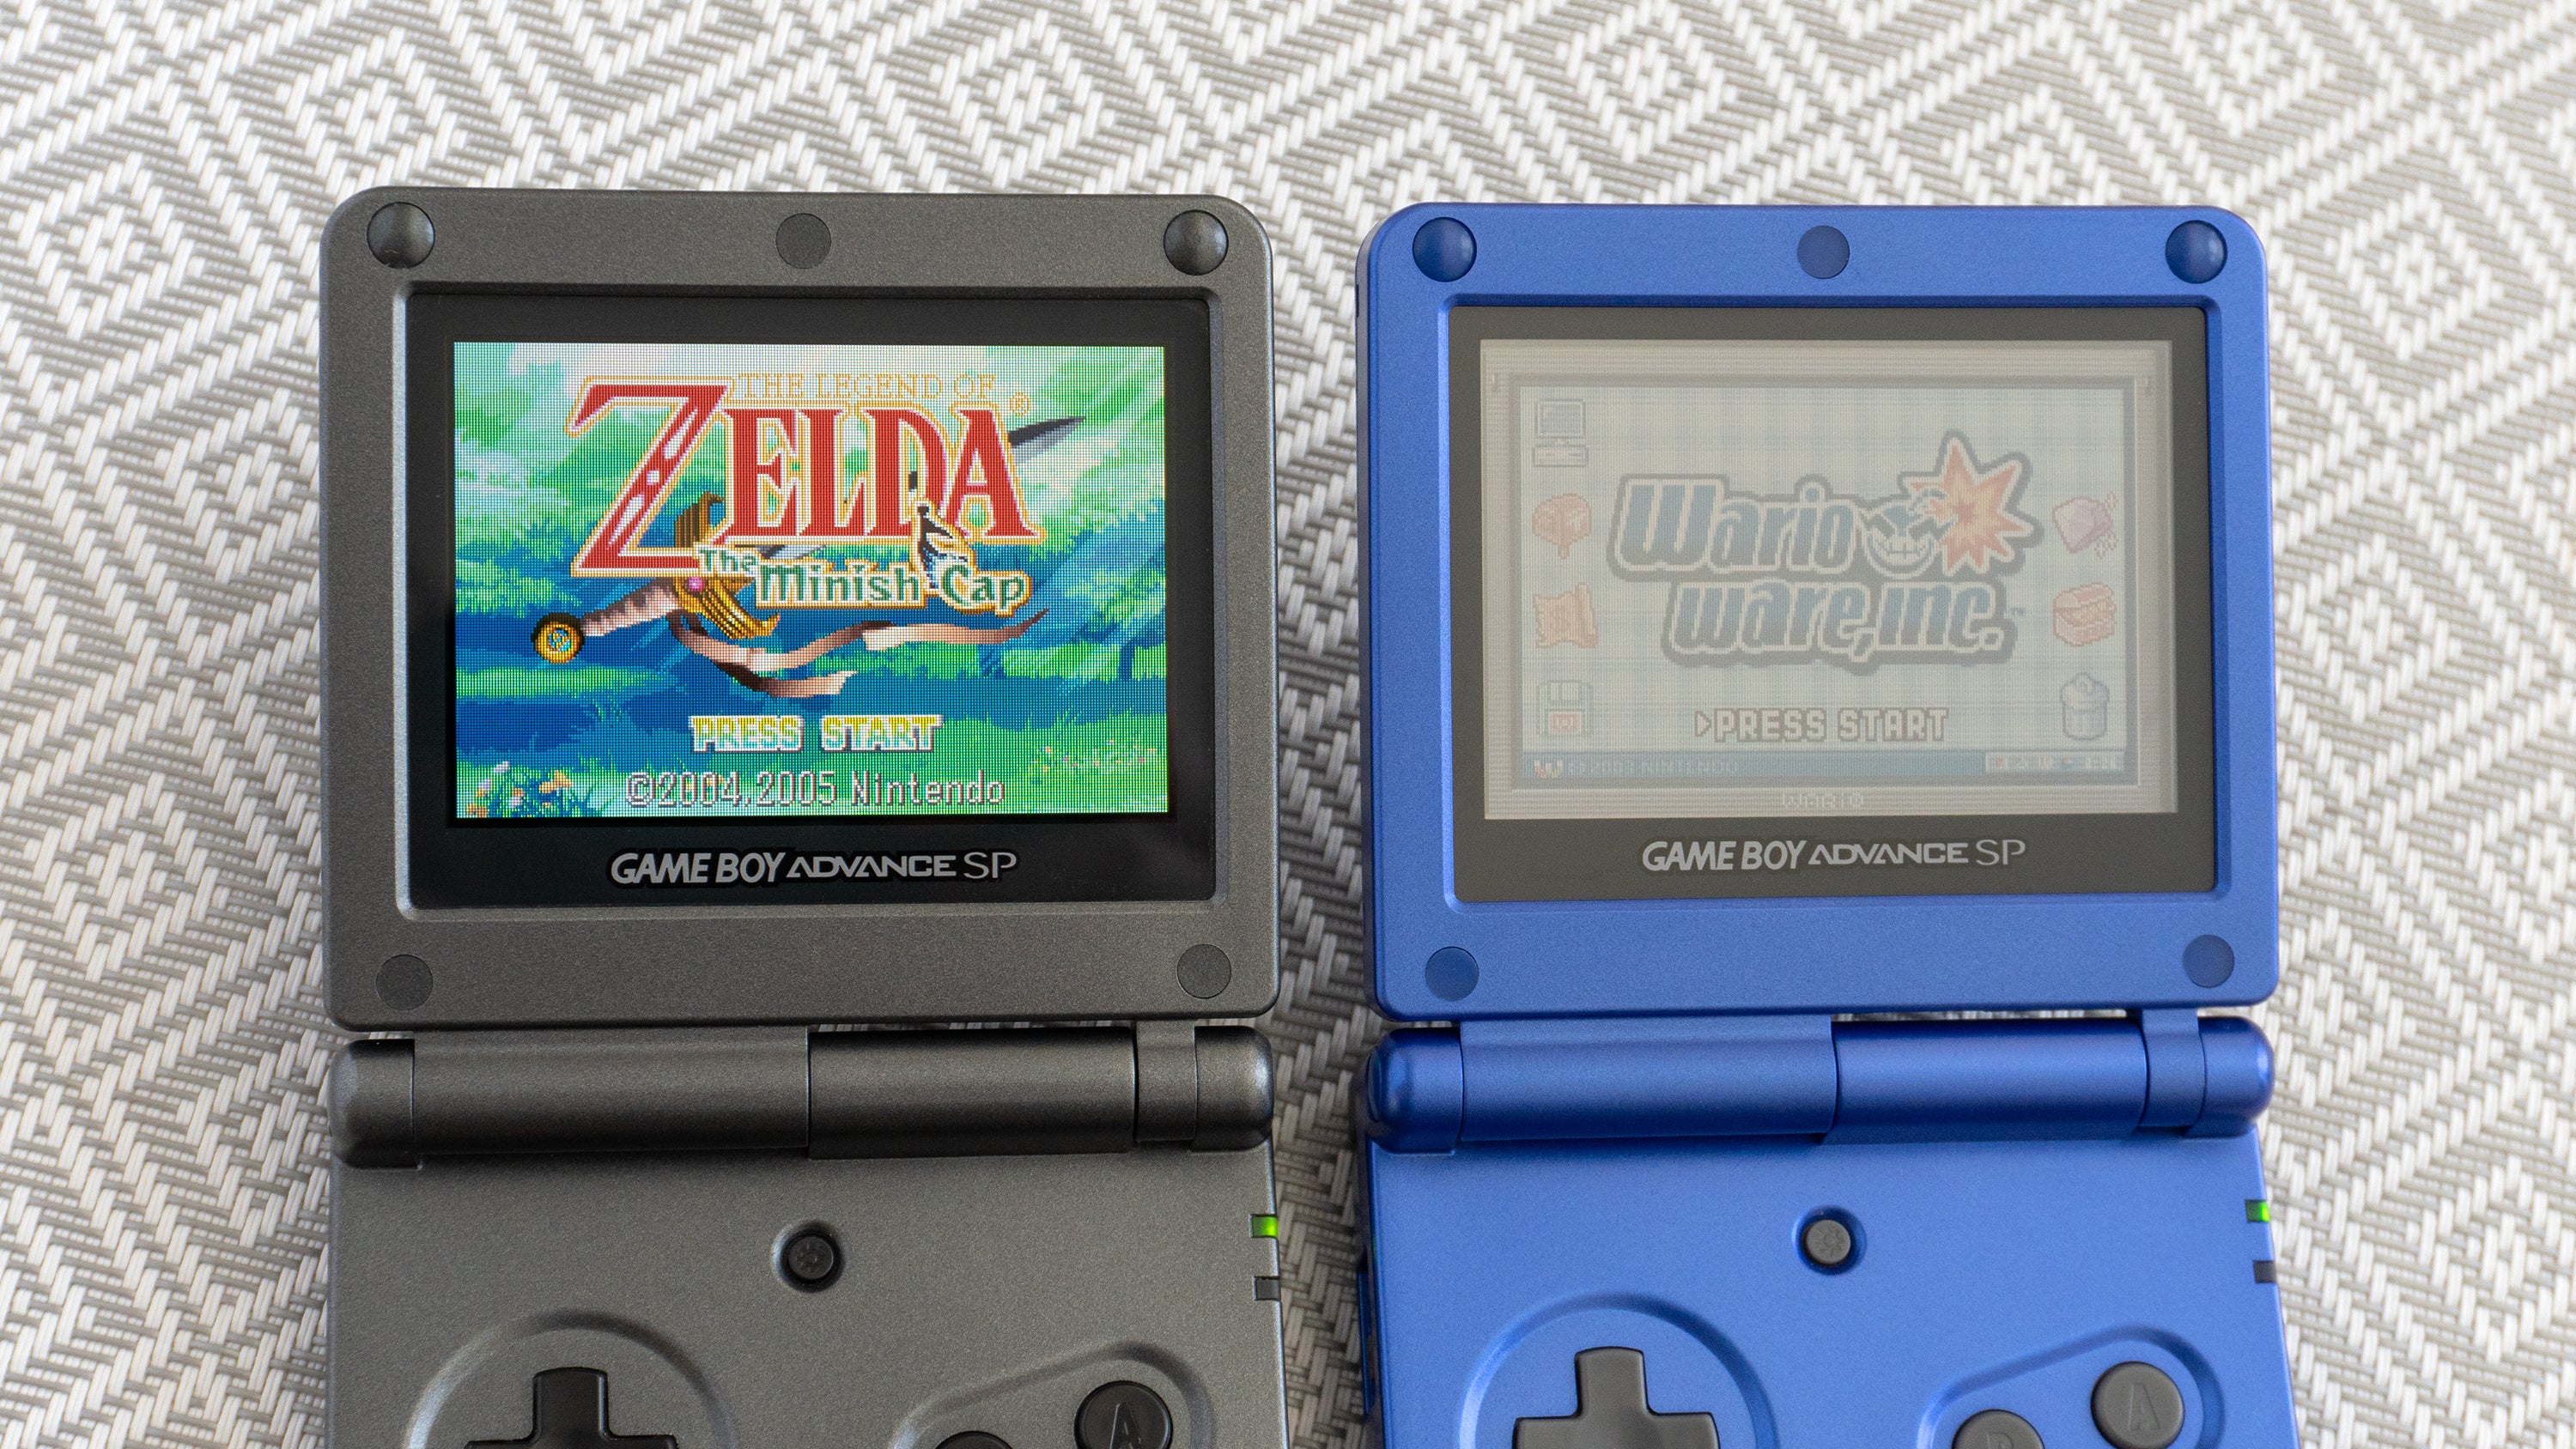 The backlit screen on the GBA SP AGS-101 model (left) looks vastly superior to the screen on the original GBA SP AGS-001 model (right) which used front-lighting instead. (Photo: Andrew Liszewski | Gizmodo)